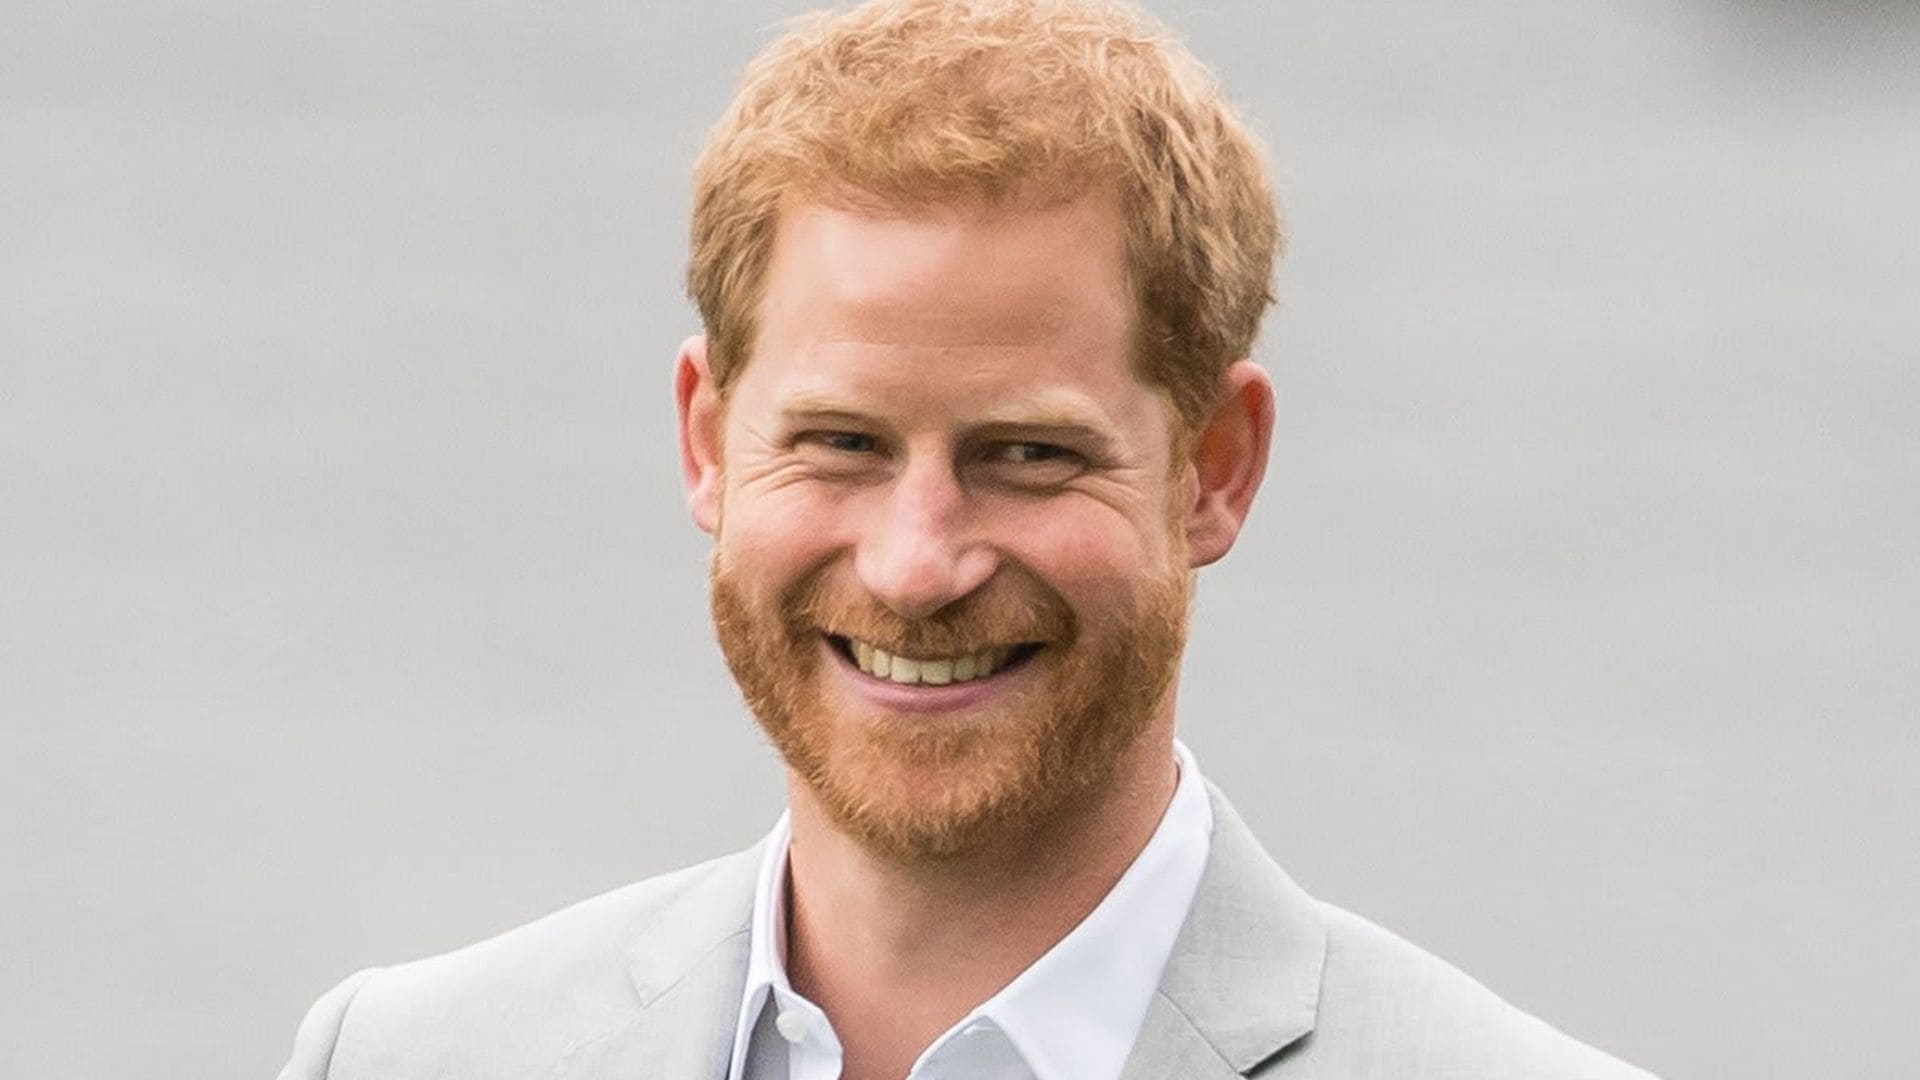 Prince Harry is writing memoir about his life 'that's accurate and wholly truthful'